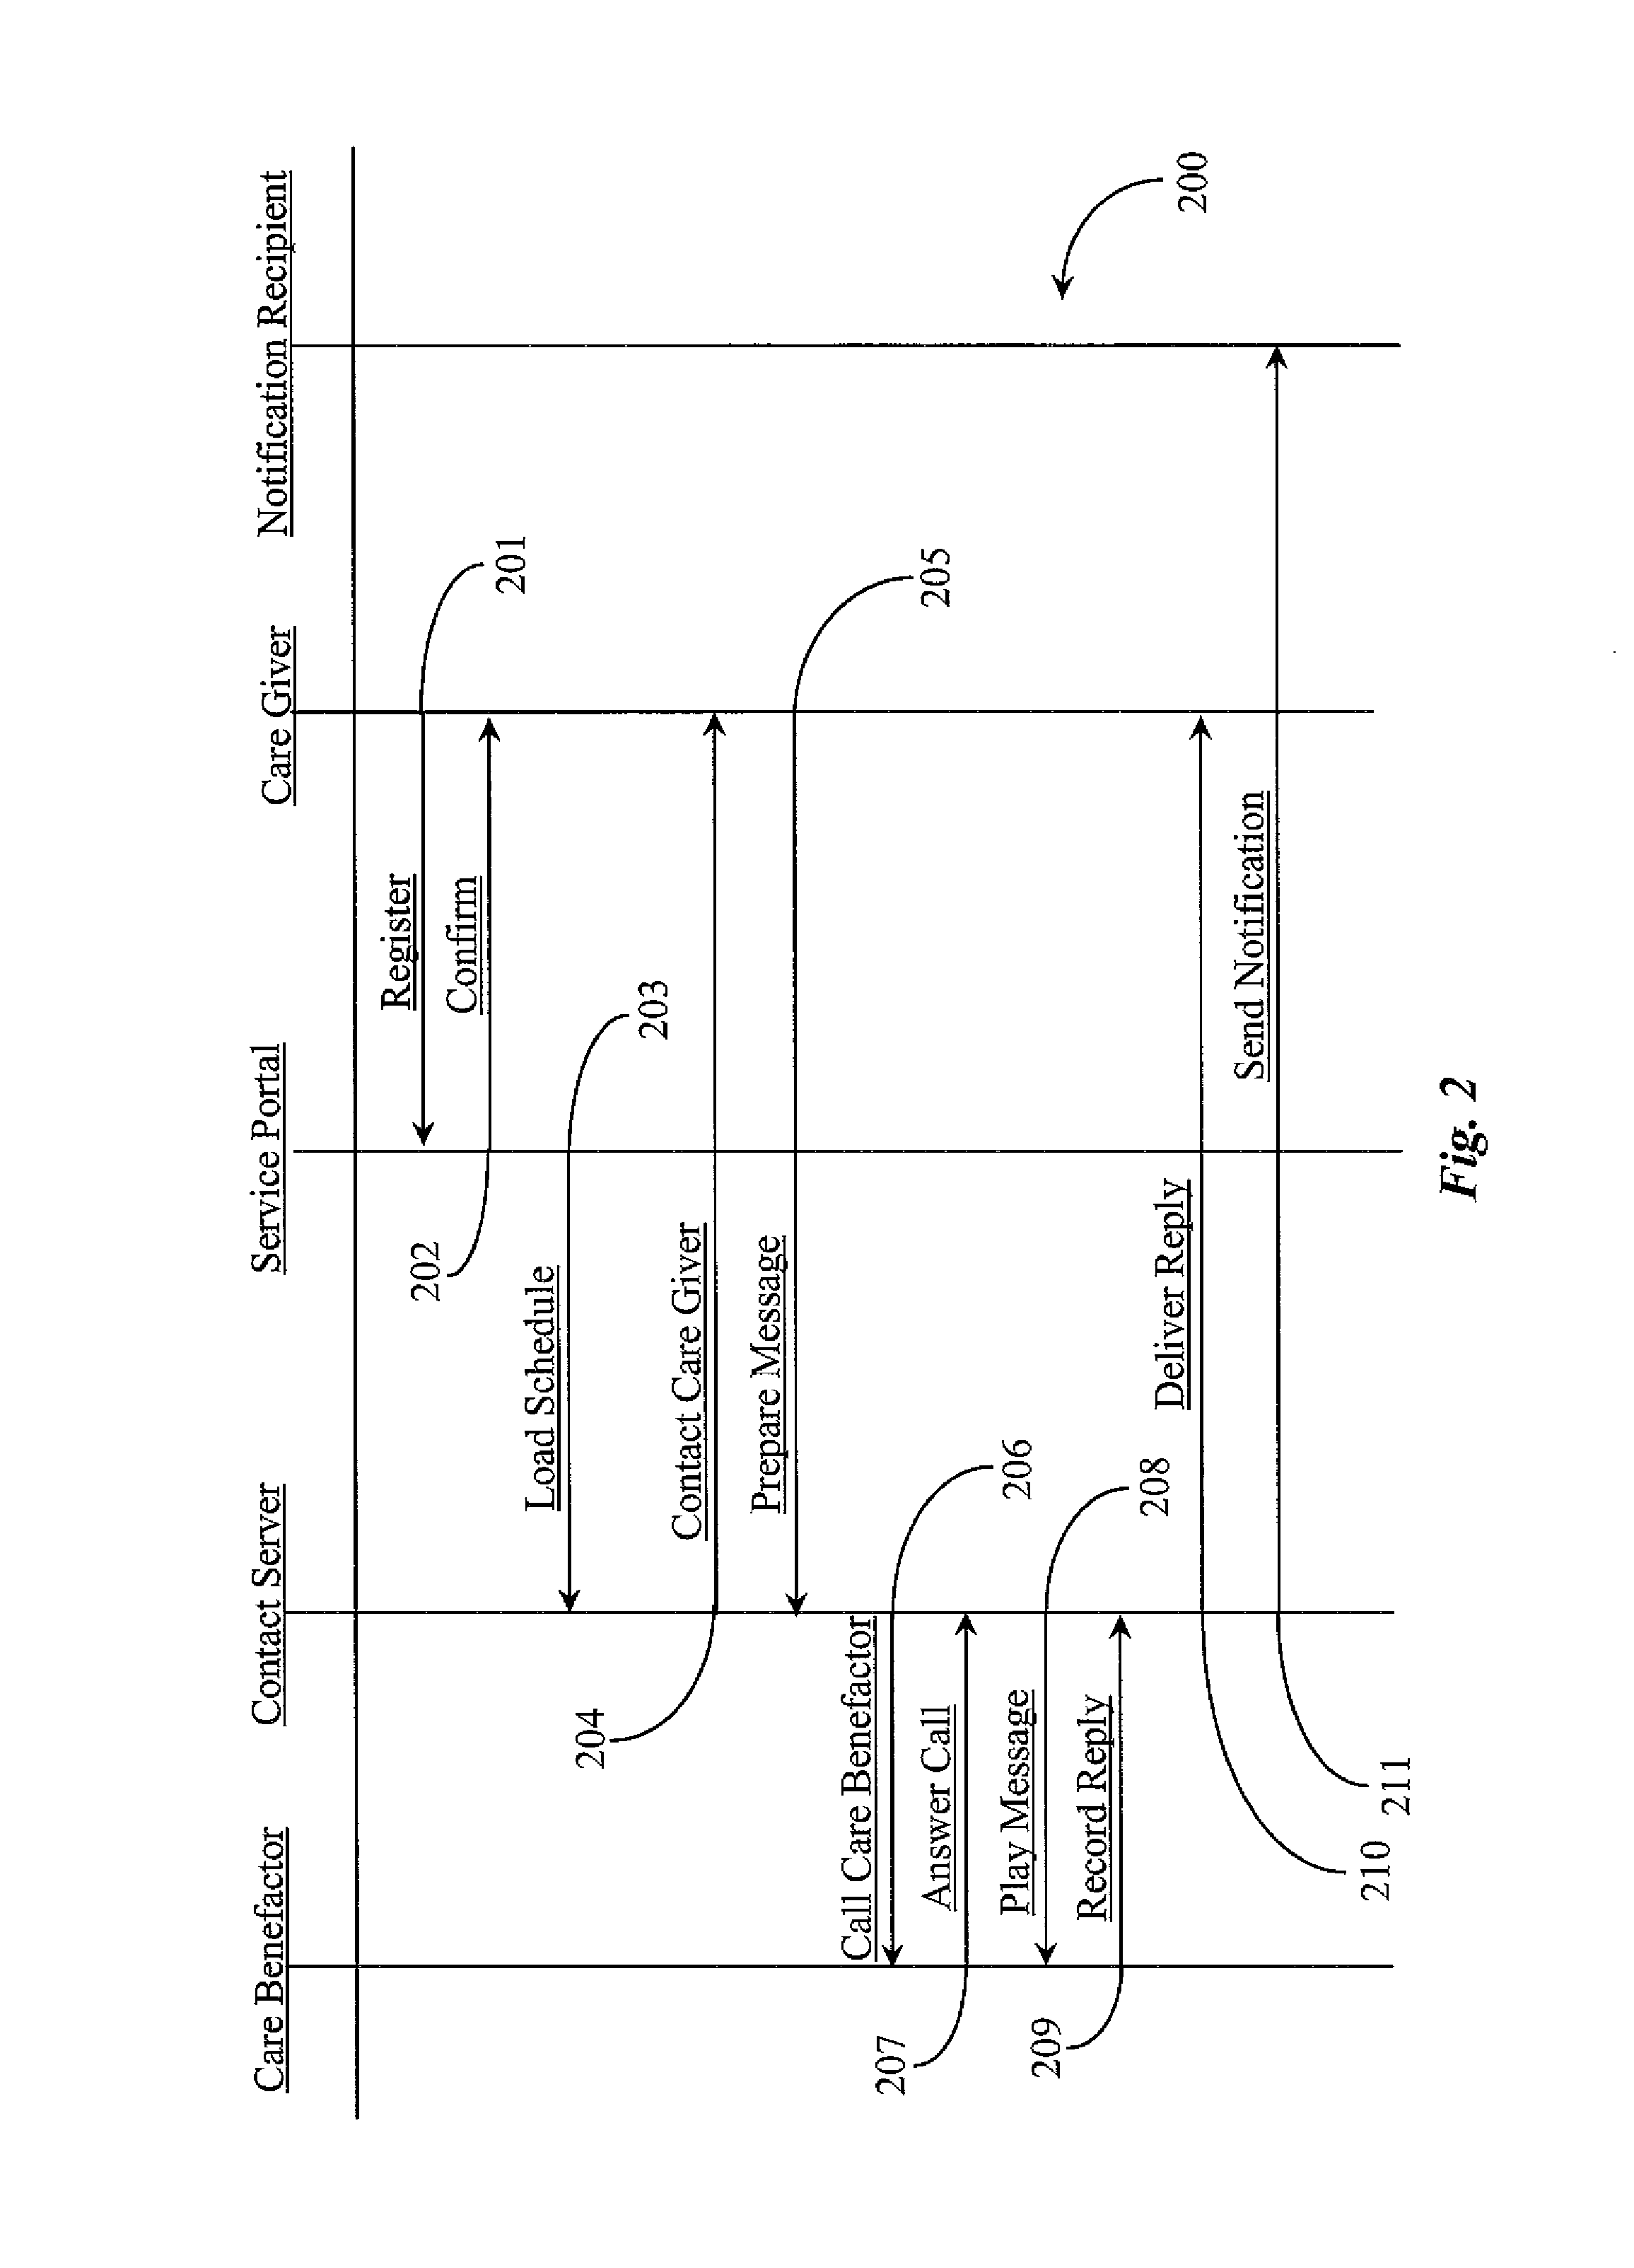 Telecommunications System for Monitoring and for Enabling a Communication Chain Between Care Givers and Benefactors and for Providing Alert Notification to Designated Recipients